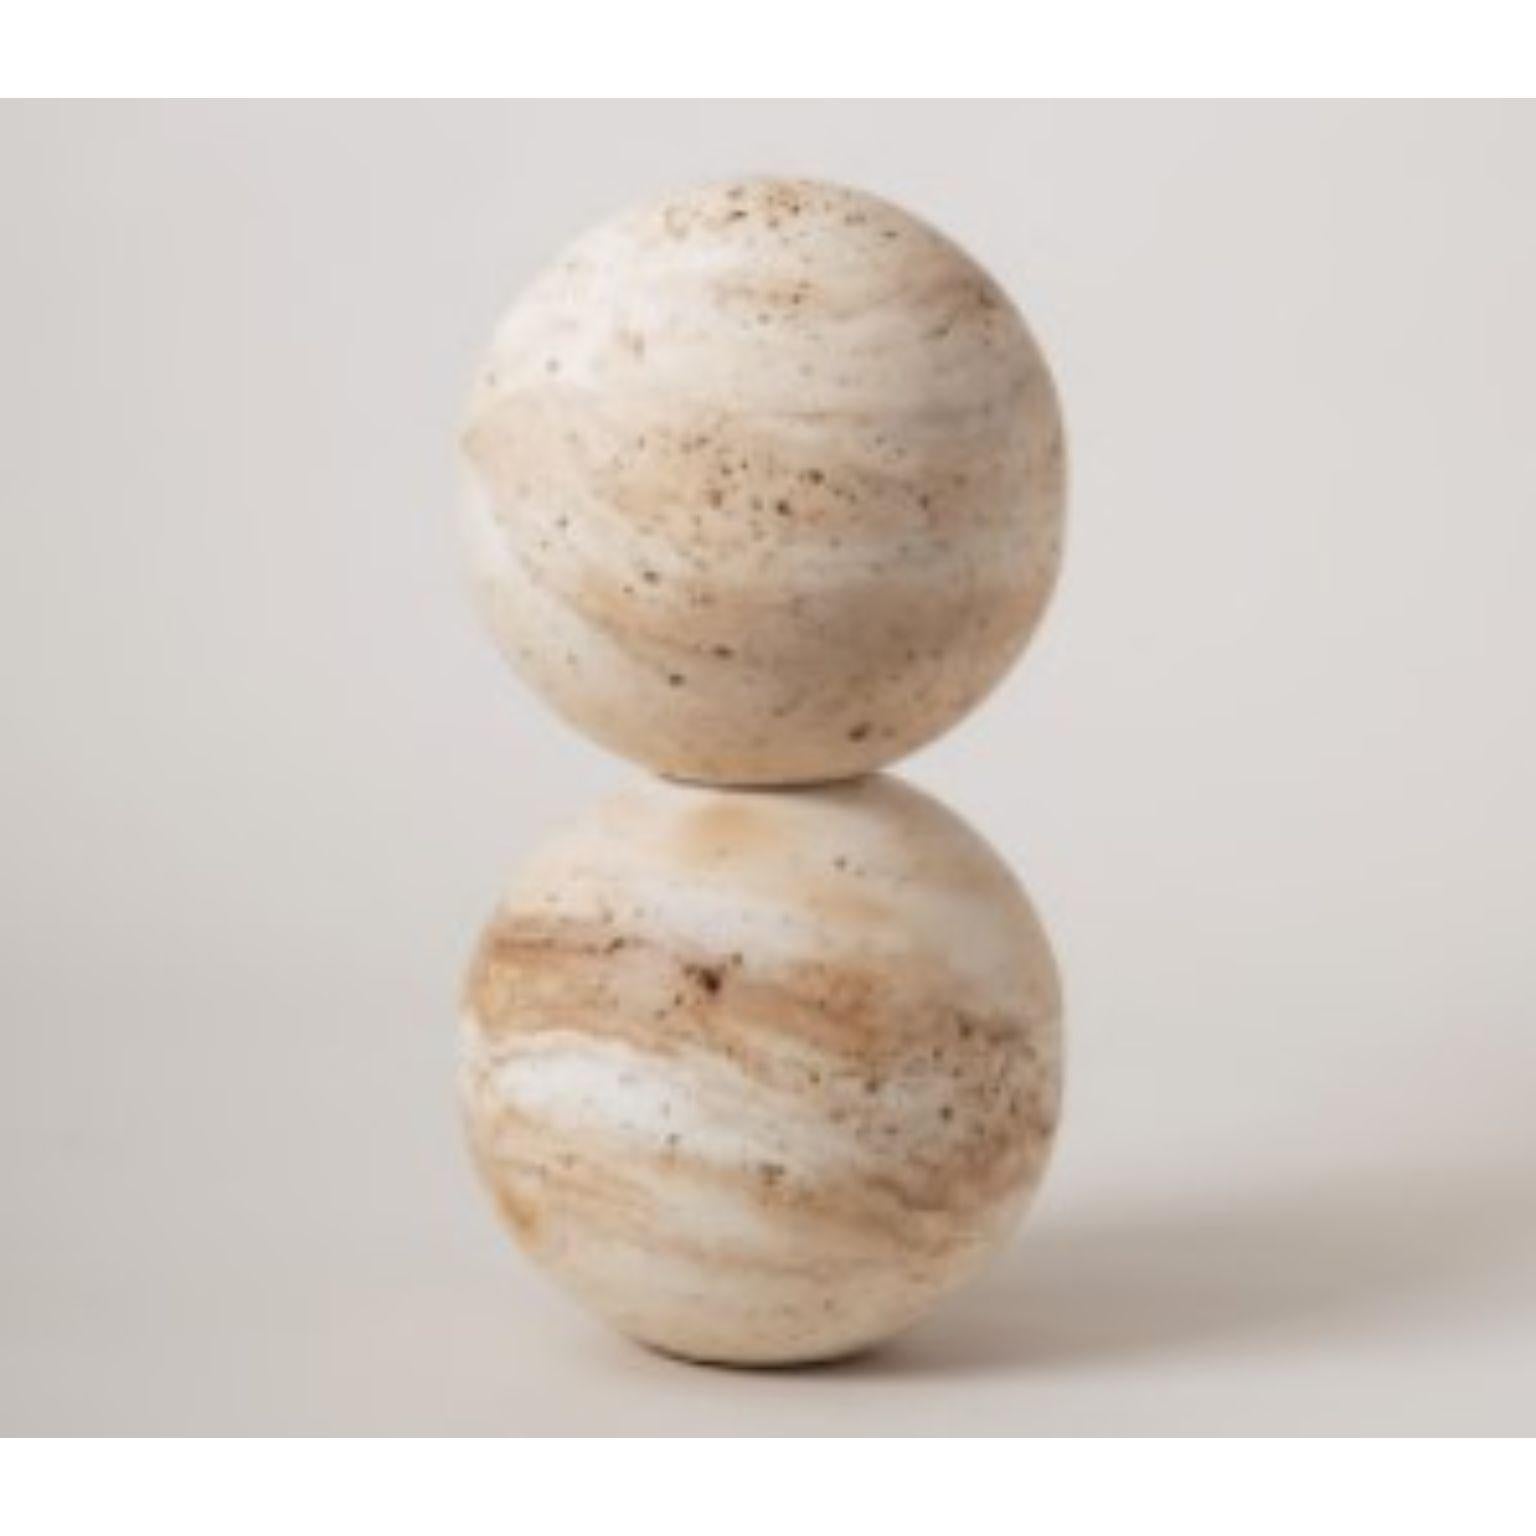 Jupiter 2 by Turbina
Future archeology
Dimensions: Ø 19.5 cm x H 32 cm
Materials: MDF

Jupiter project arises from the idea of the stone as symbol of sacredness. Therefore Jupiter is a modular piece composed by spheres and semi spheres stacked